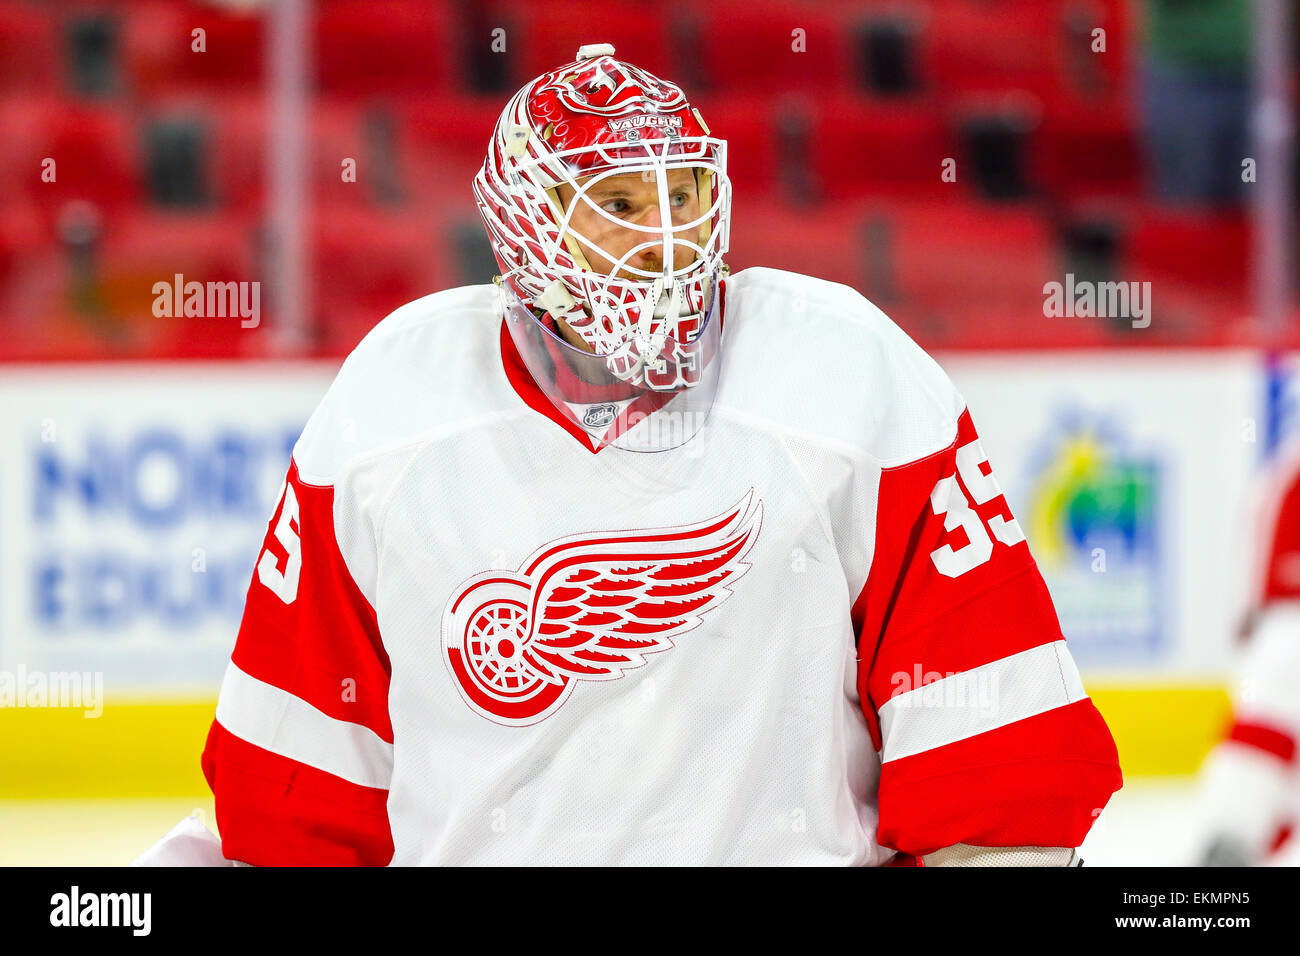 Detroit Red Wings goalie Jimmy Howard (35) during the NHL game between the Detroit Red Wings and the Carolina Hurricanes at the PNC Arena. The Detroit Red Wings defeated the Carolina Hurricanes 3-1. Stock Photo